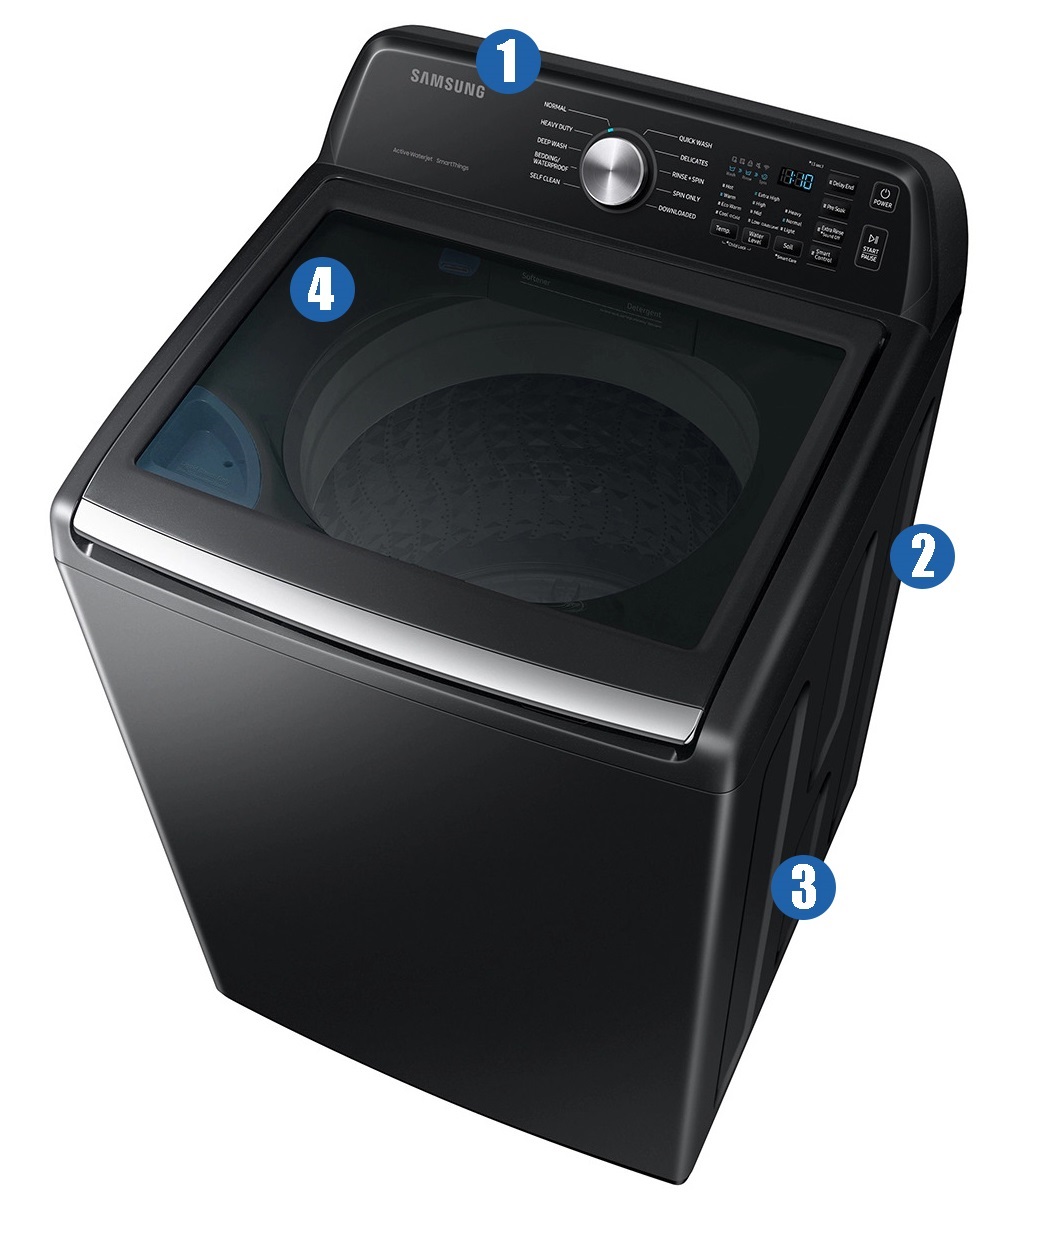 Locating the Model Number on a Top Load Washer